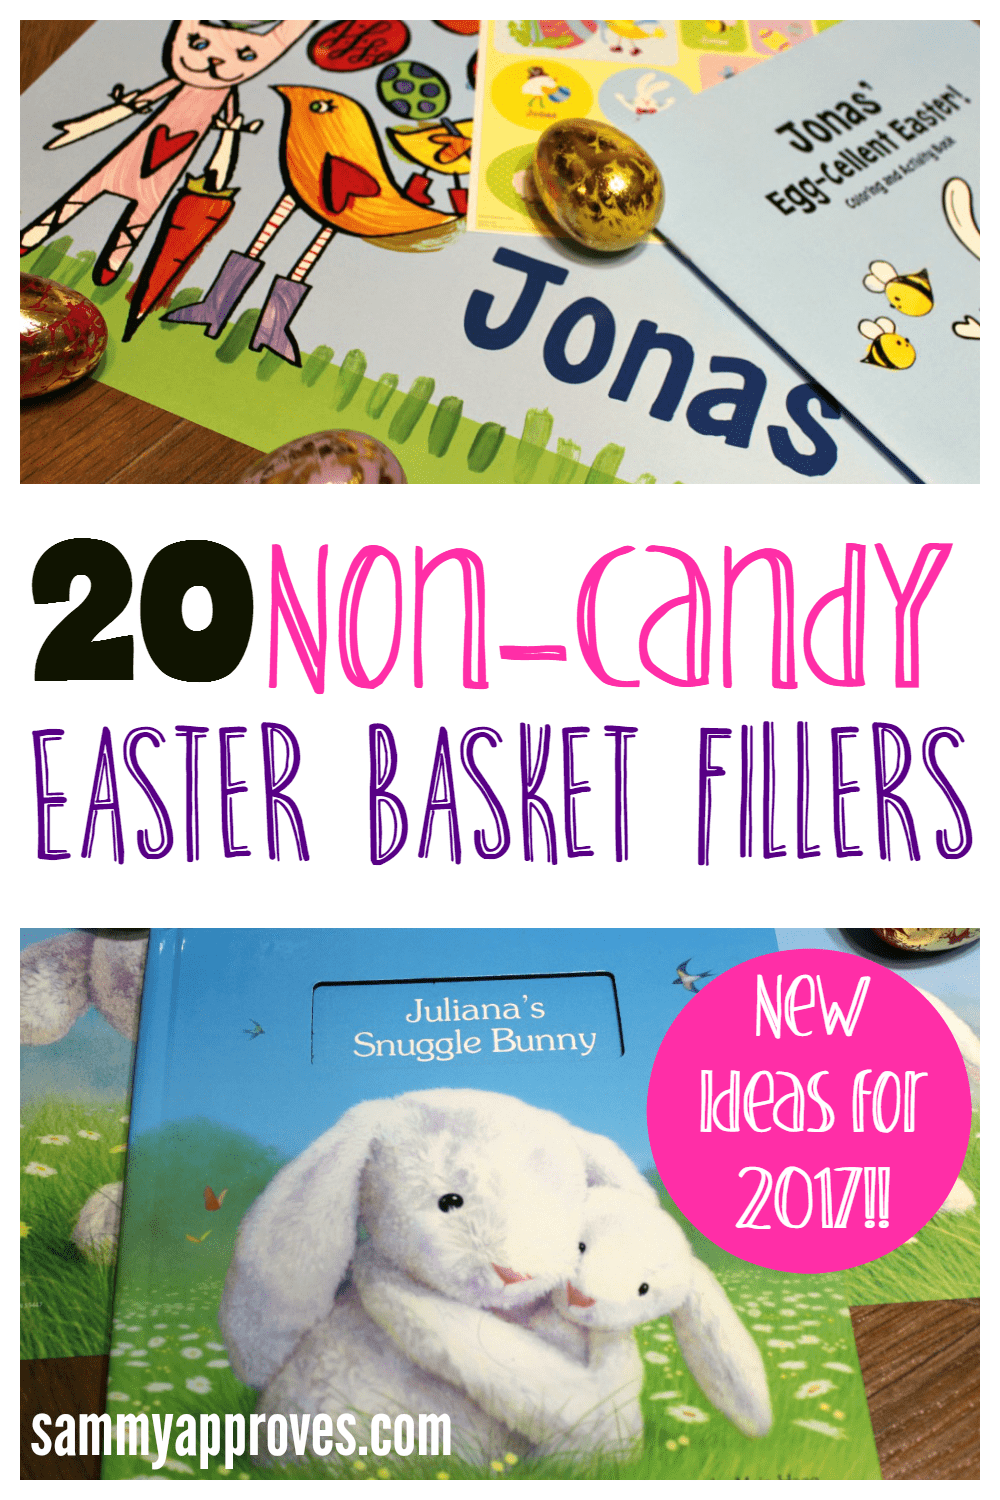 20 Non-Candy Easter Basket Fillers